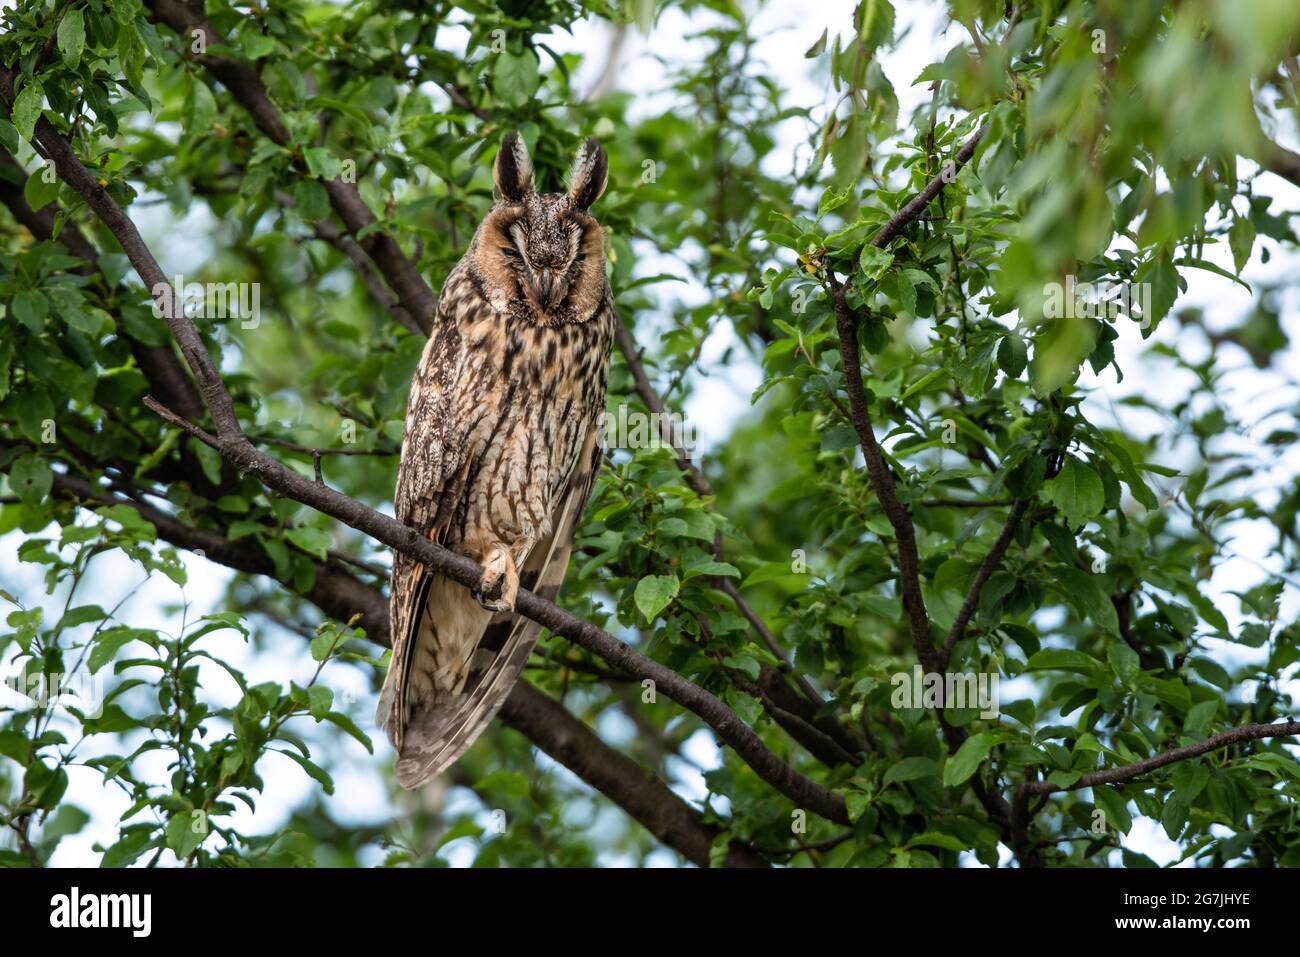 Cute Long-eared owl sitting on a tree branch, majestic owl portrait, cute Asio Otus sleeps with closed eyes Stock Photo